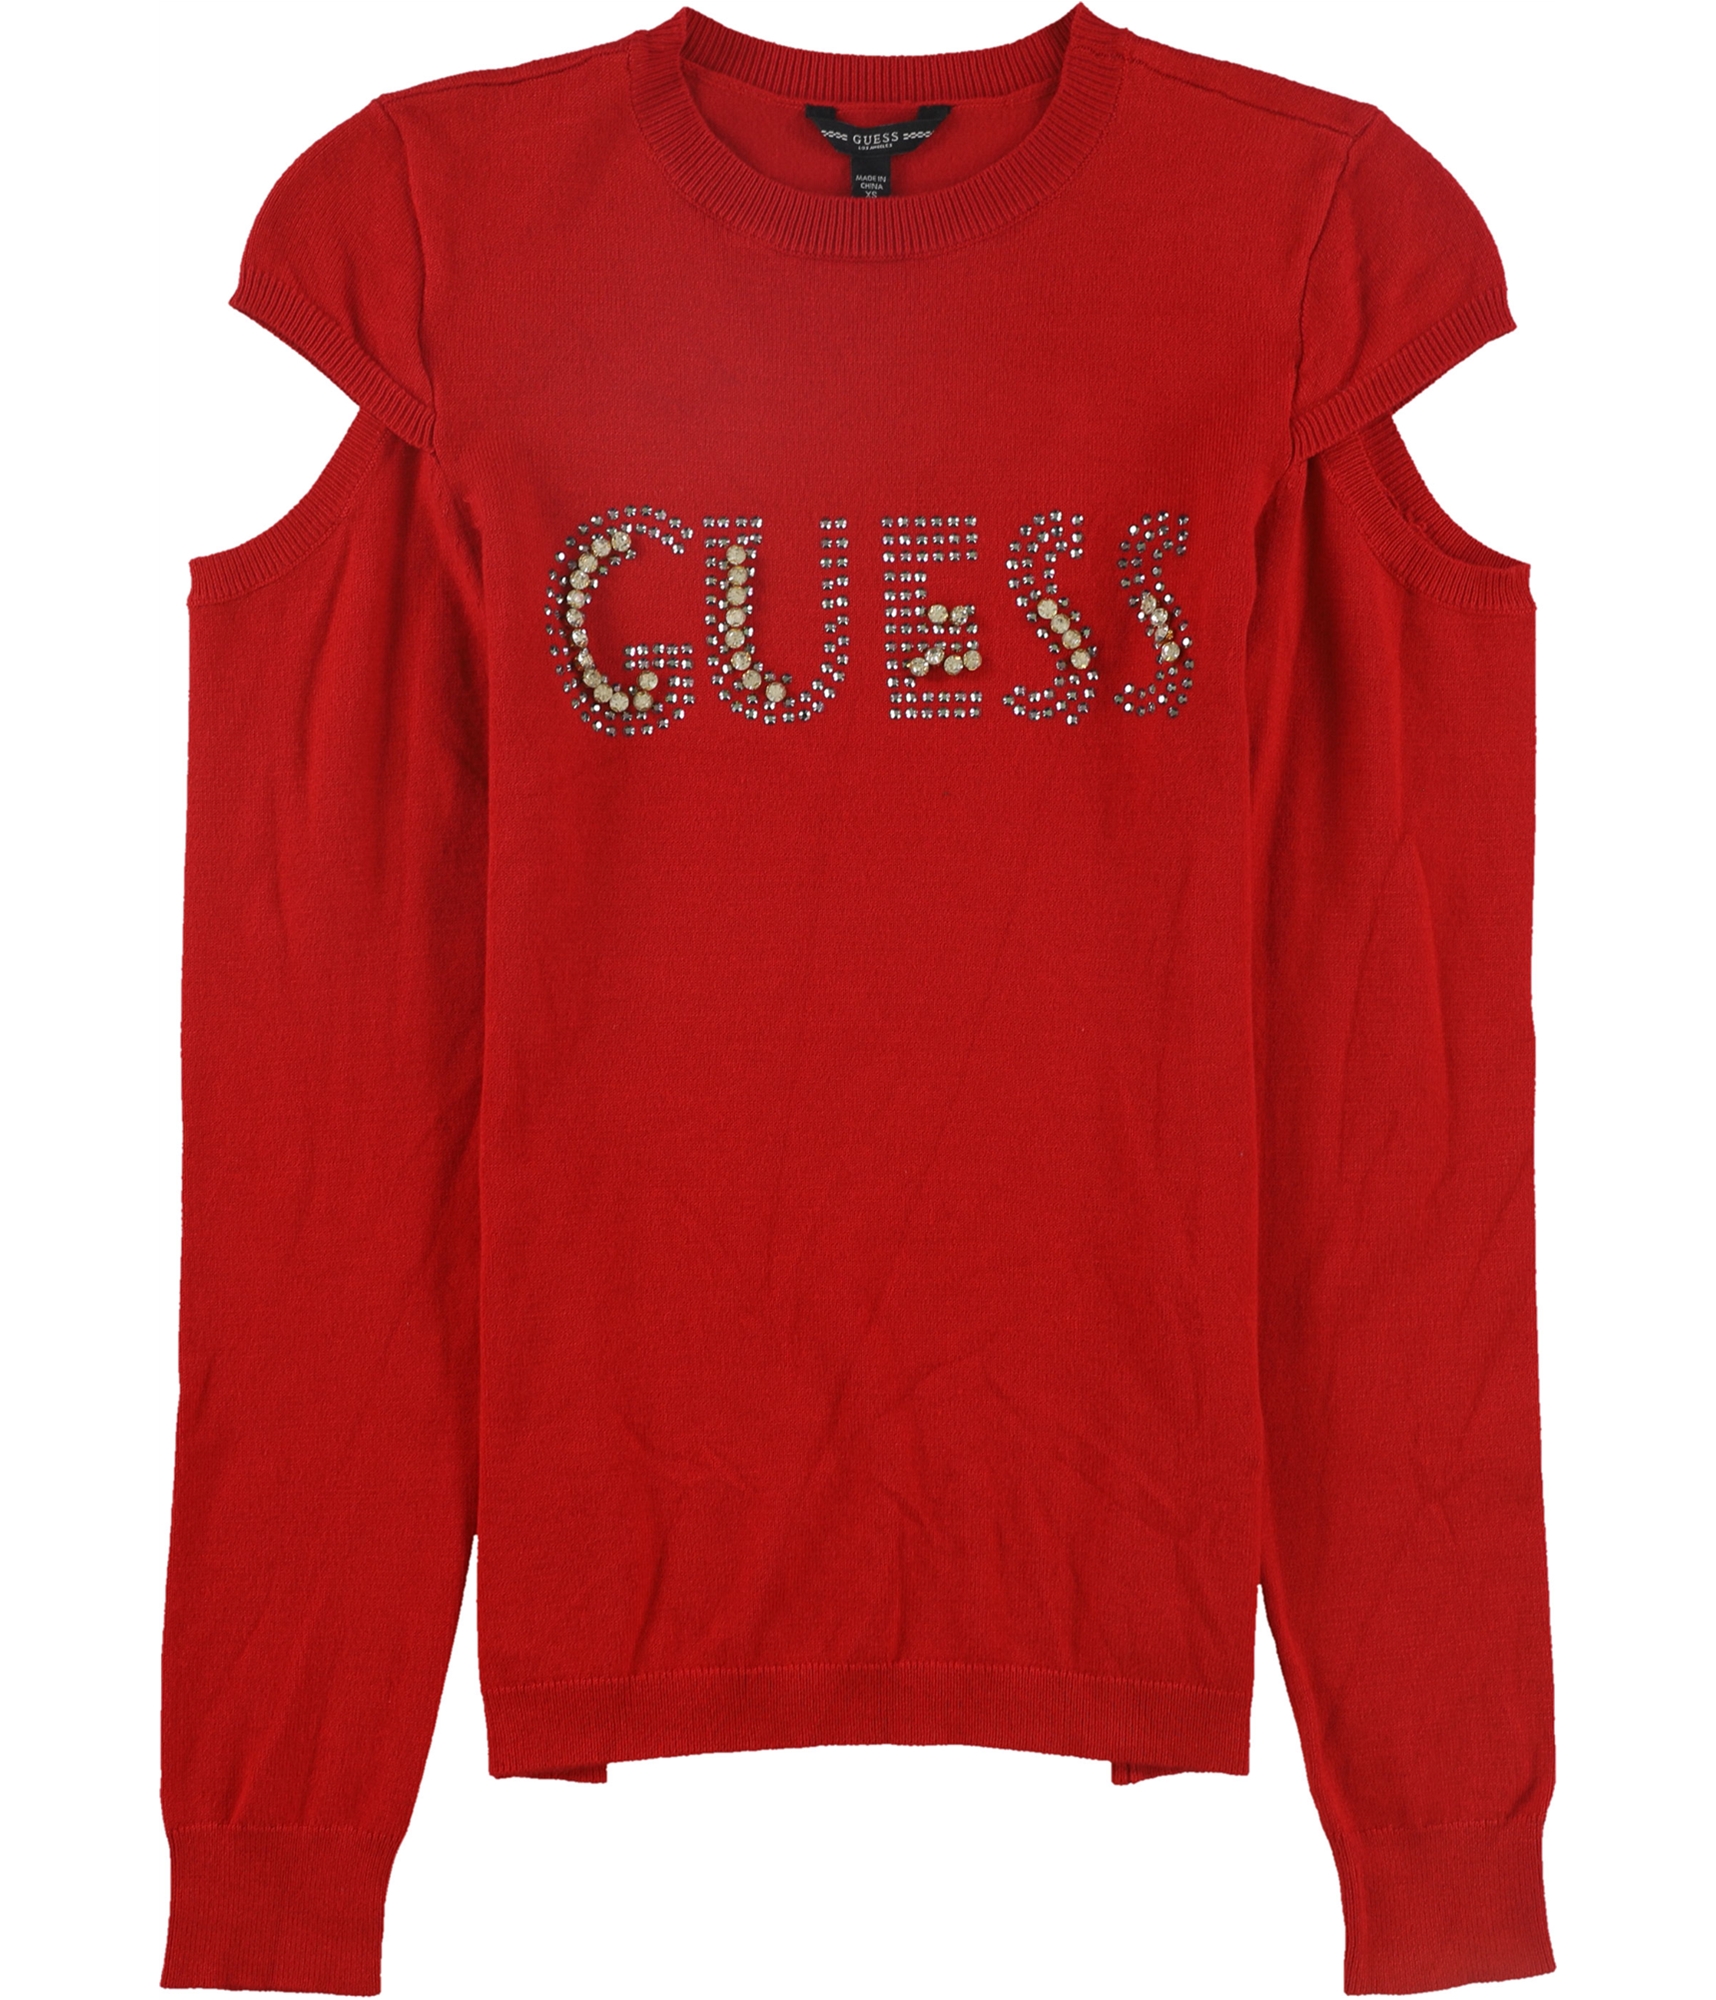 pullover guess mujer